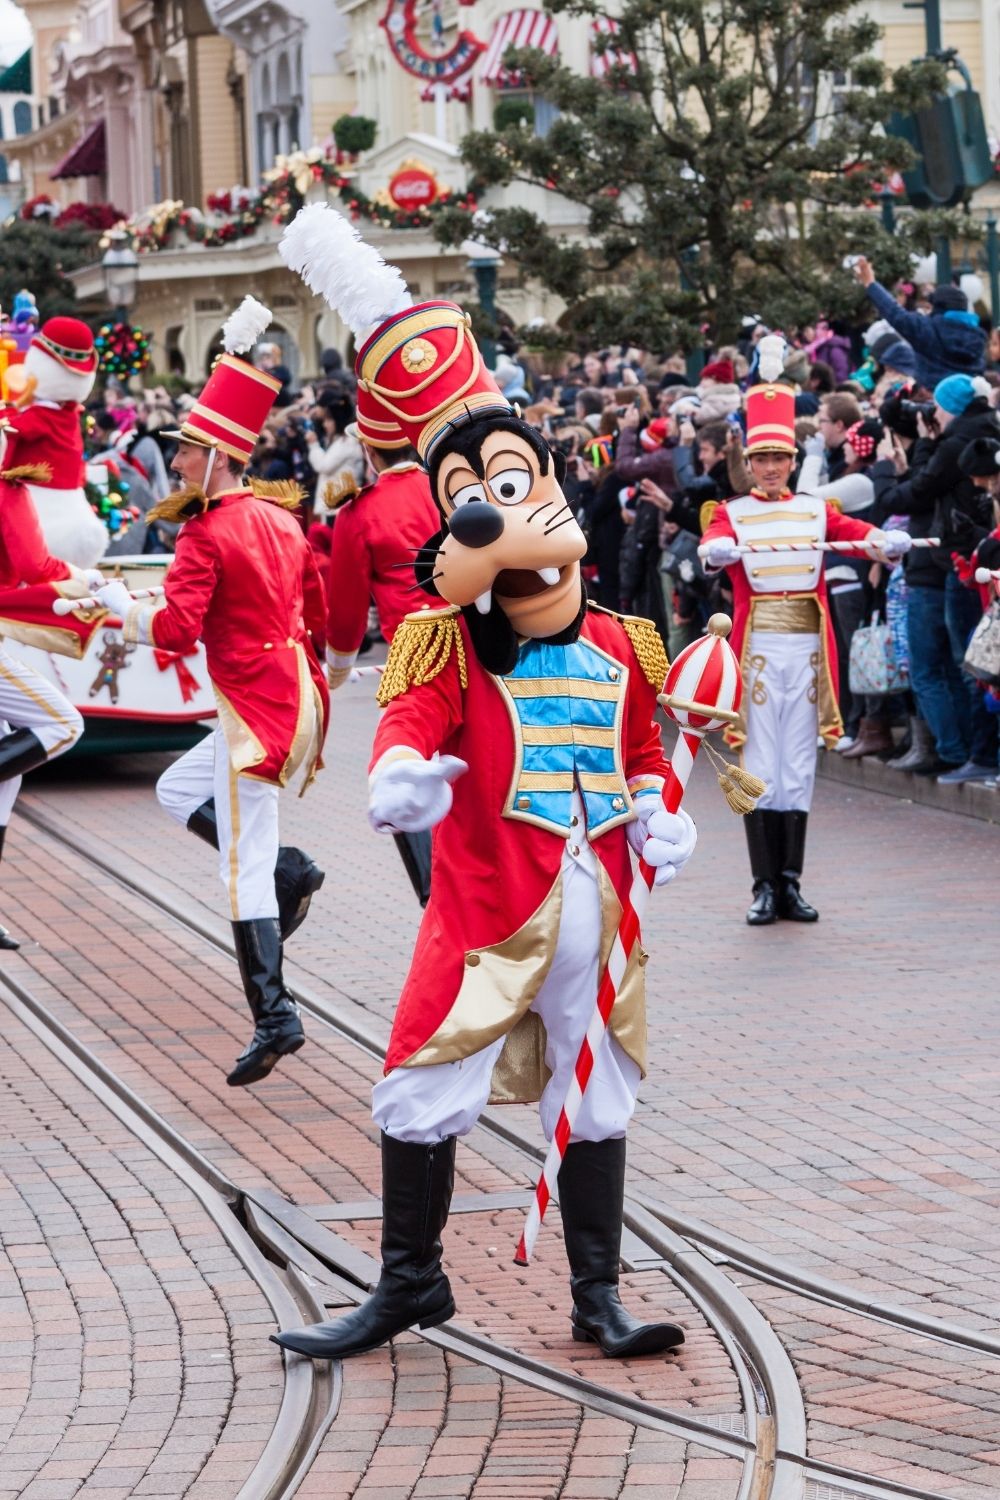 Goofy, a fur character (or masked character) marches in a holiday parade at Disney World